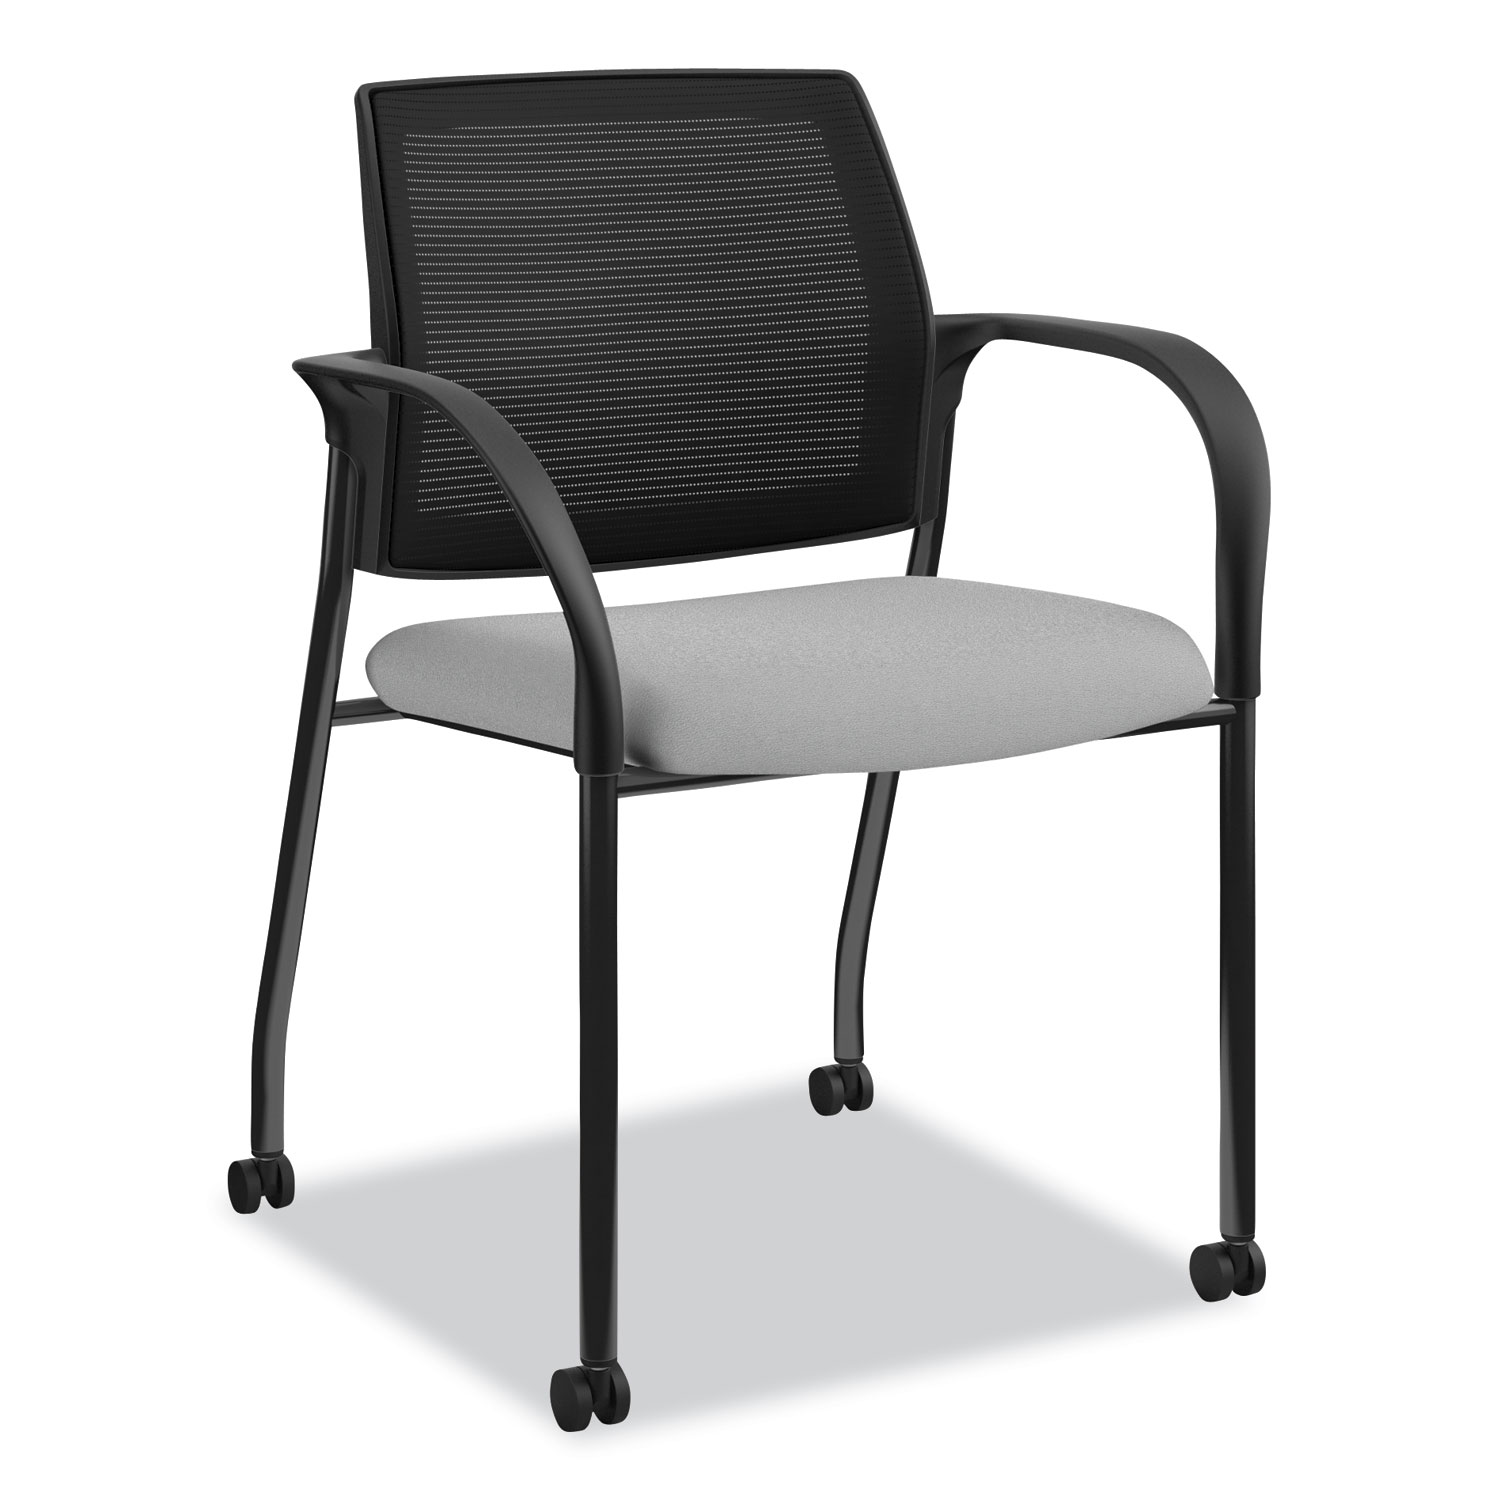  HON HONIS107HIMCU22 Ignition Series Mesh Back Mobile Stacking Chair, Frost Seat, Black Back, Black Base (HONIS107HIMCU22) 